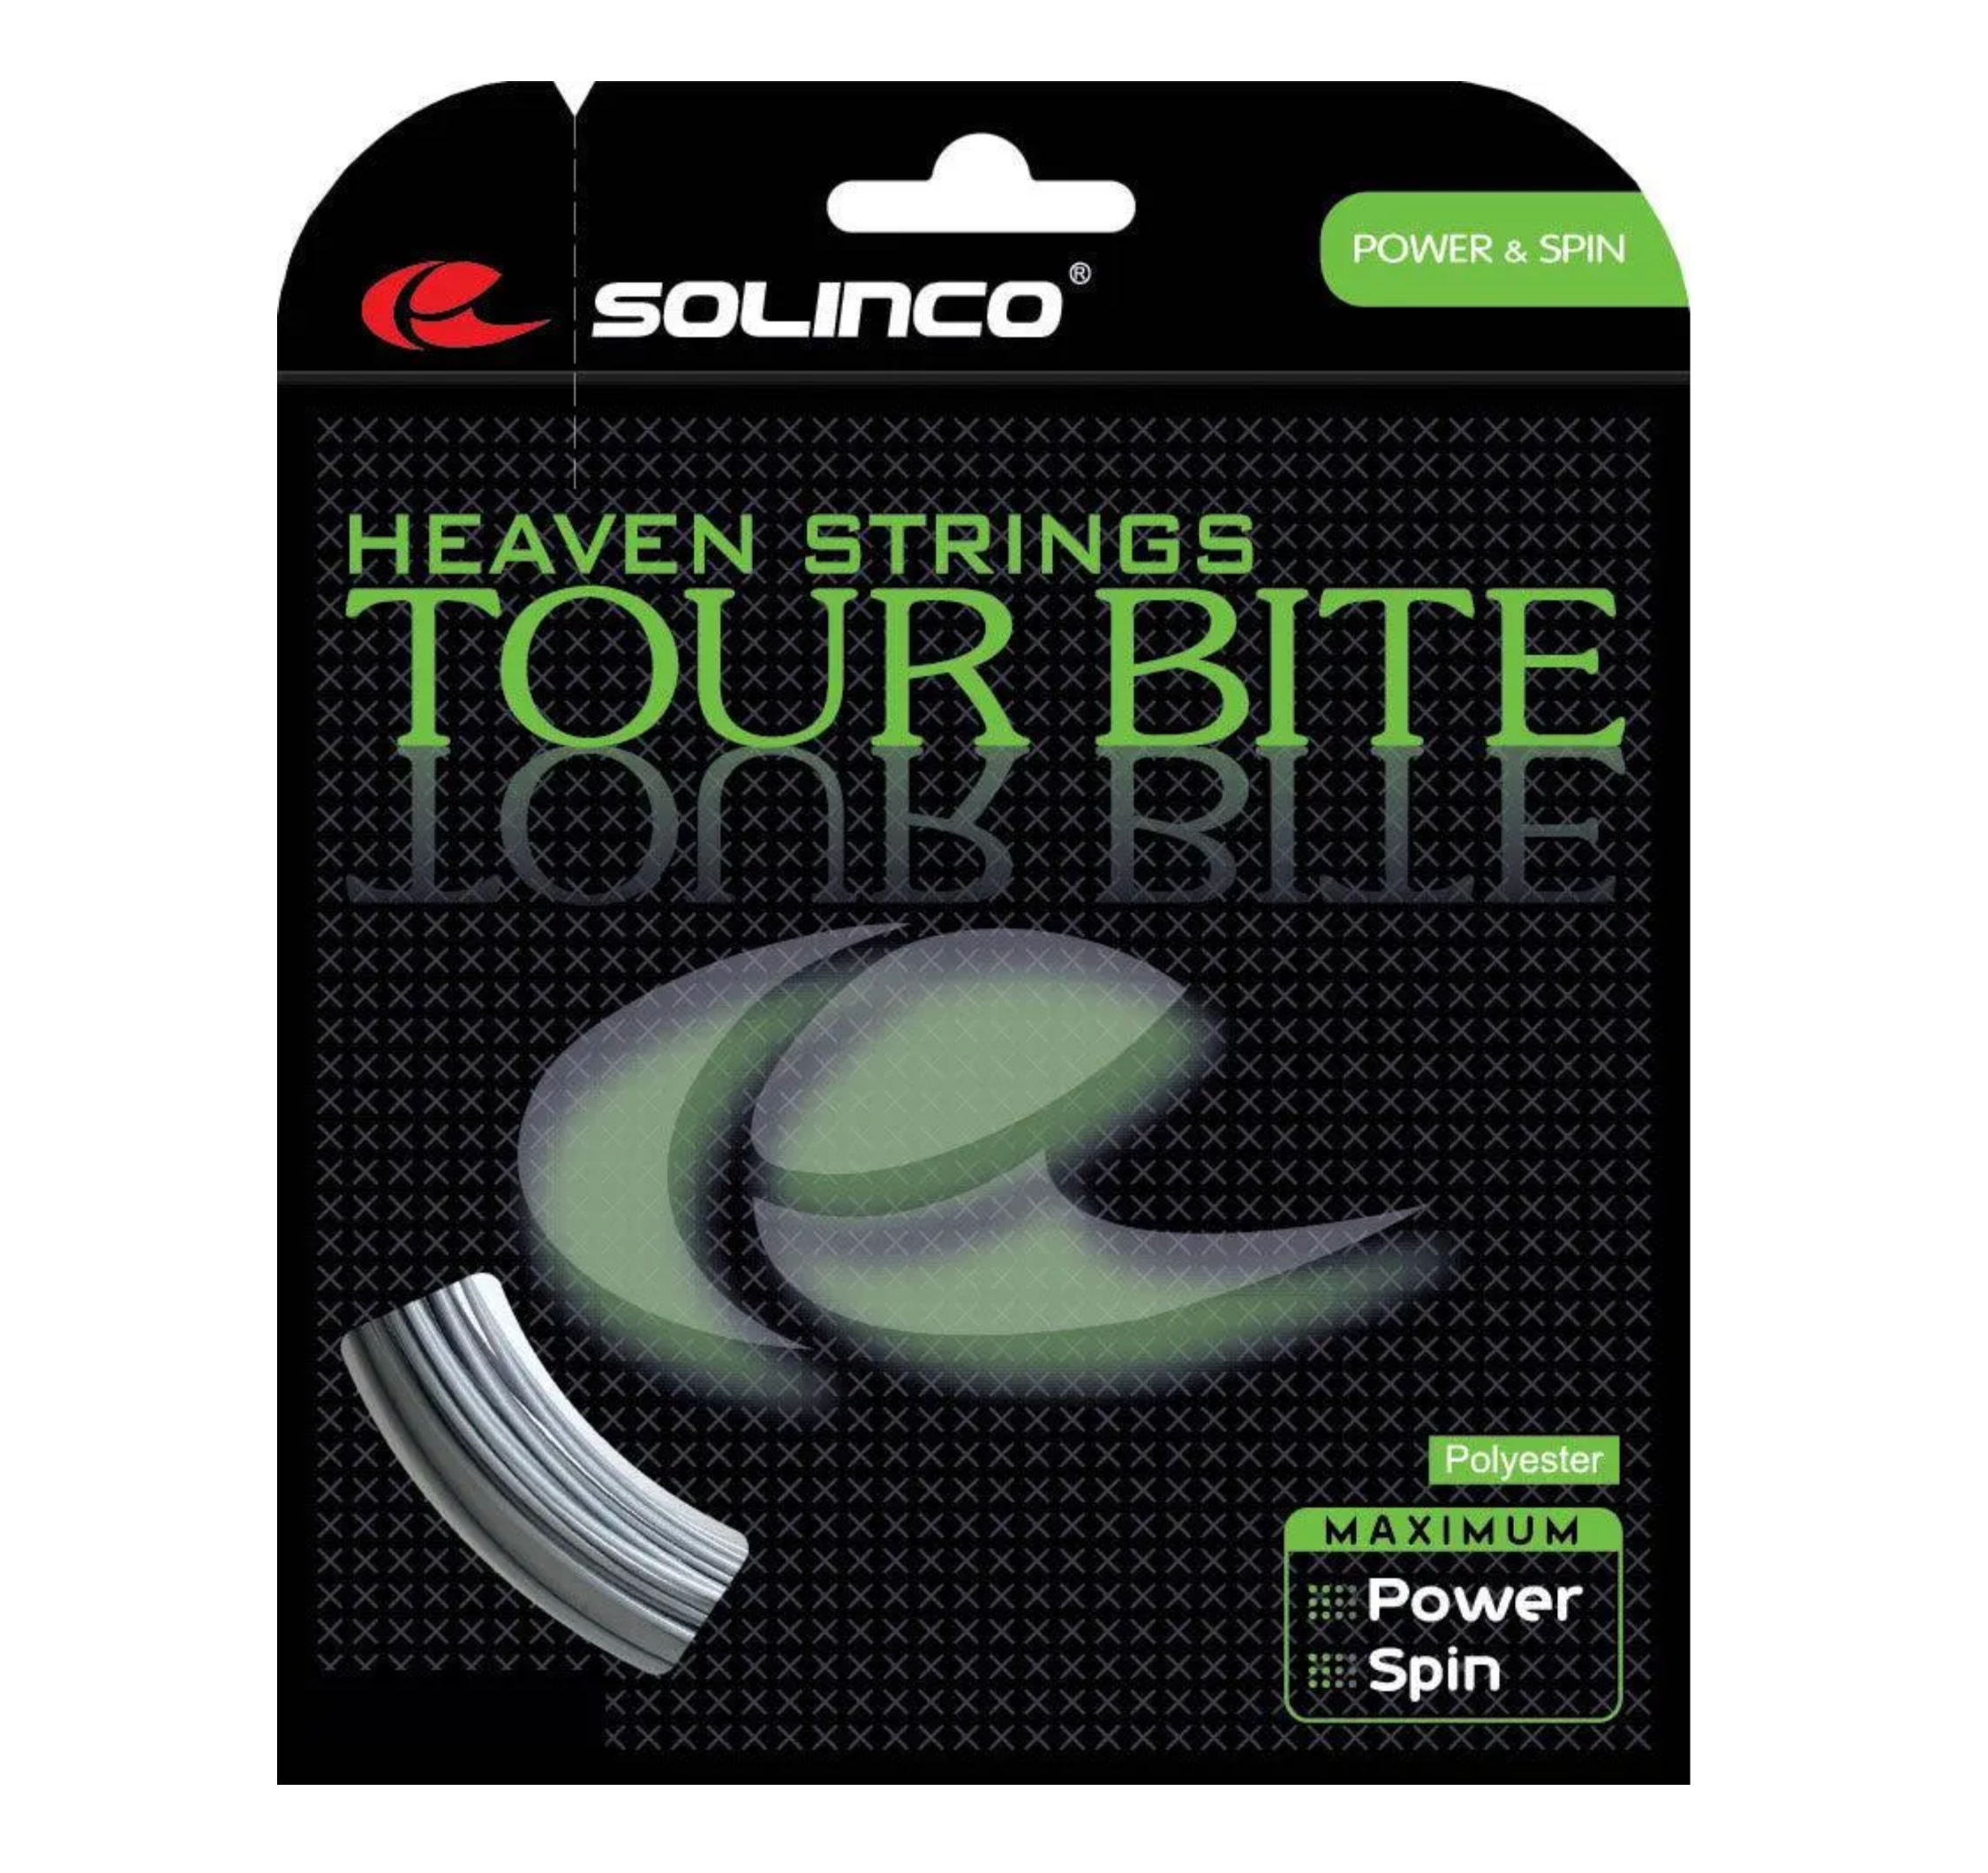 Detailed view of the Solinco Tour Bite 16 Tennis String